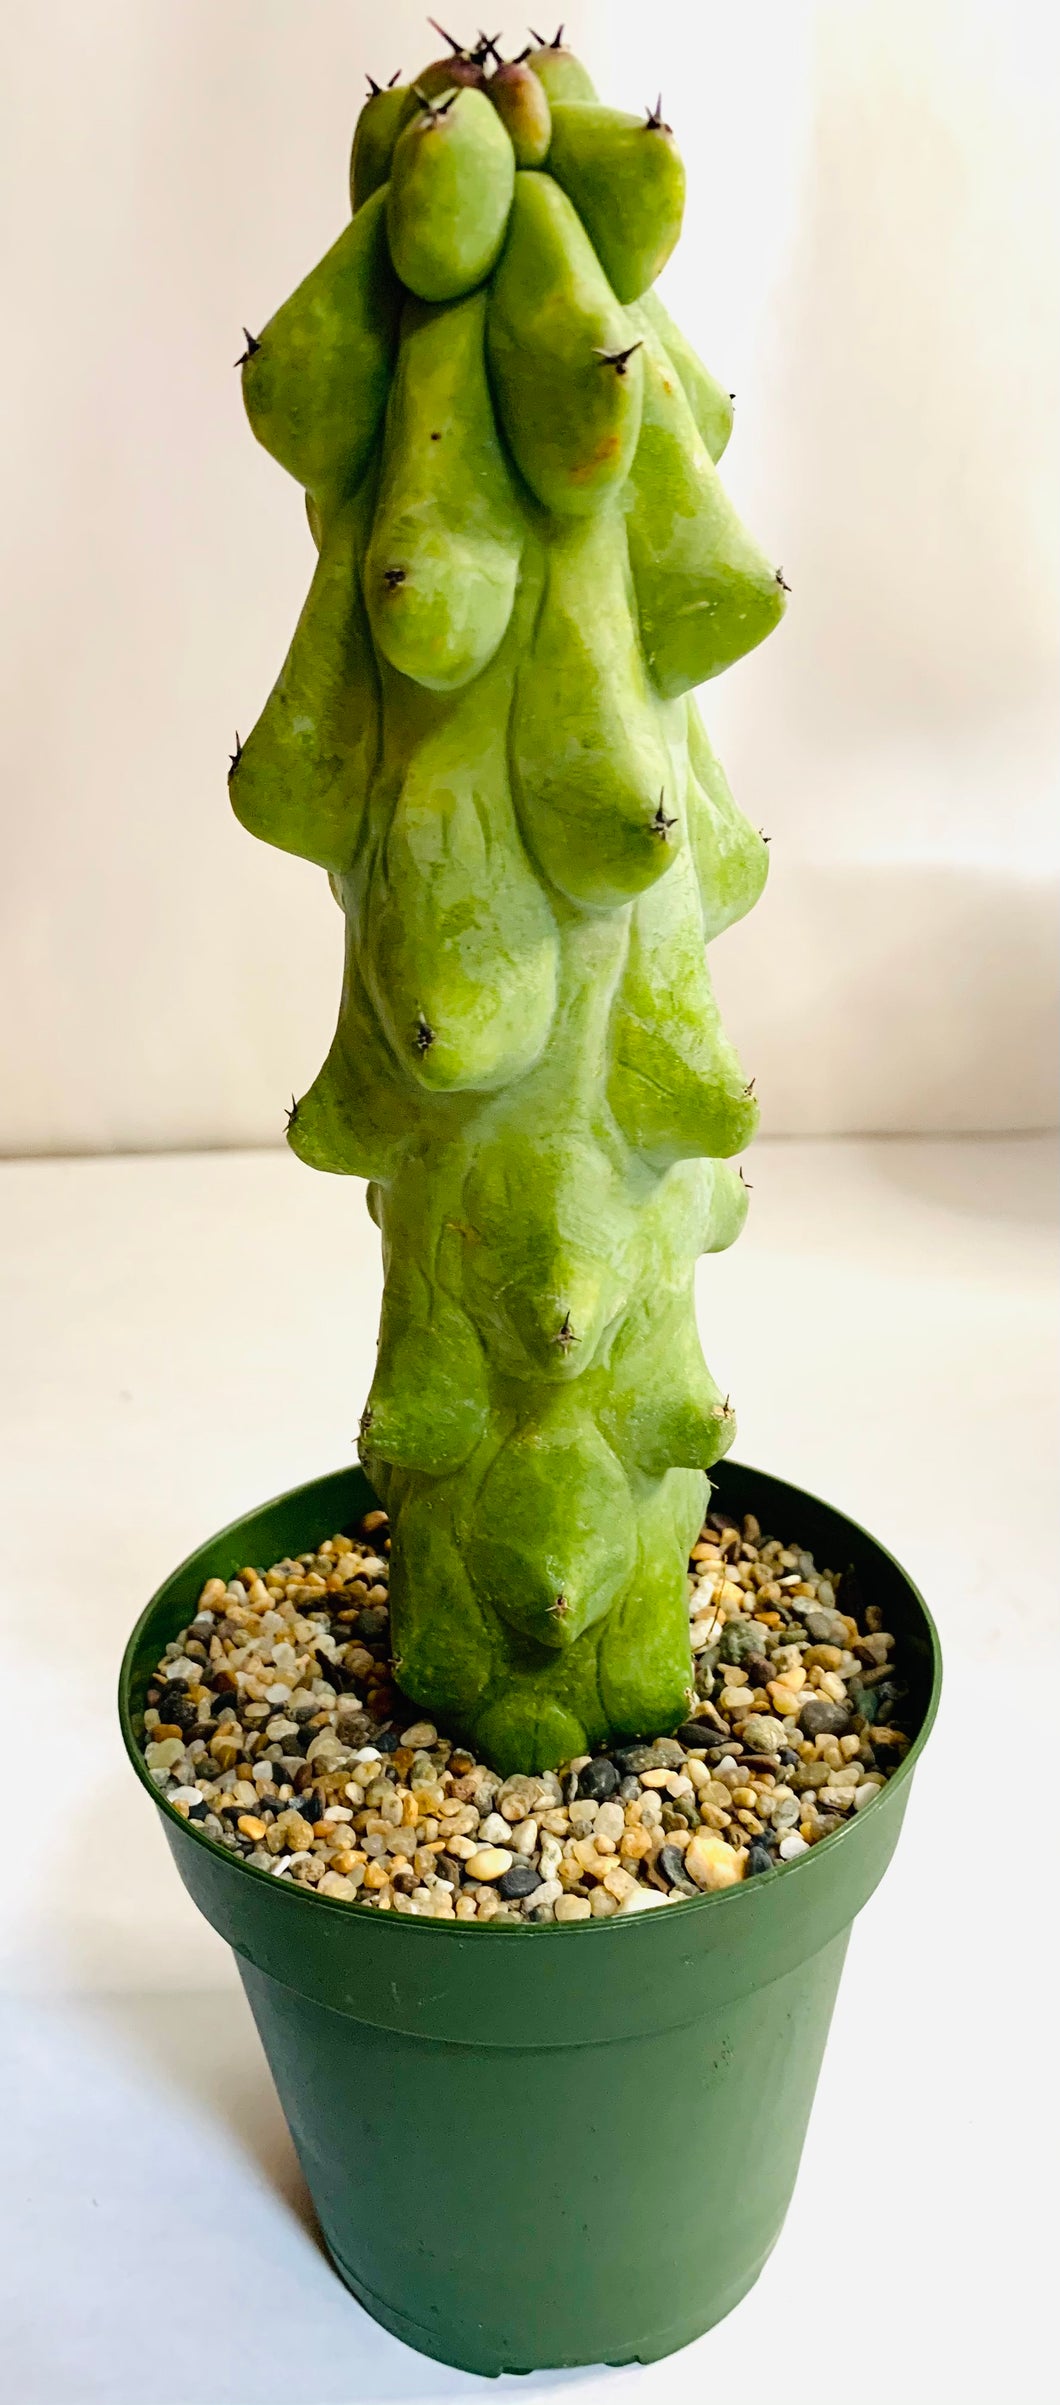 A tall vertical-growing blue-green cactus. The cactus is uniformly covered in bulbous growths, at the tip of which grows small cactus spines.